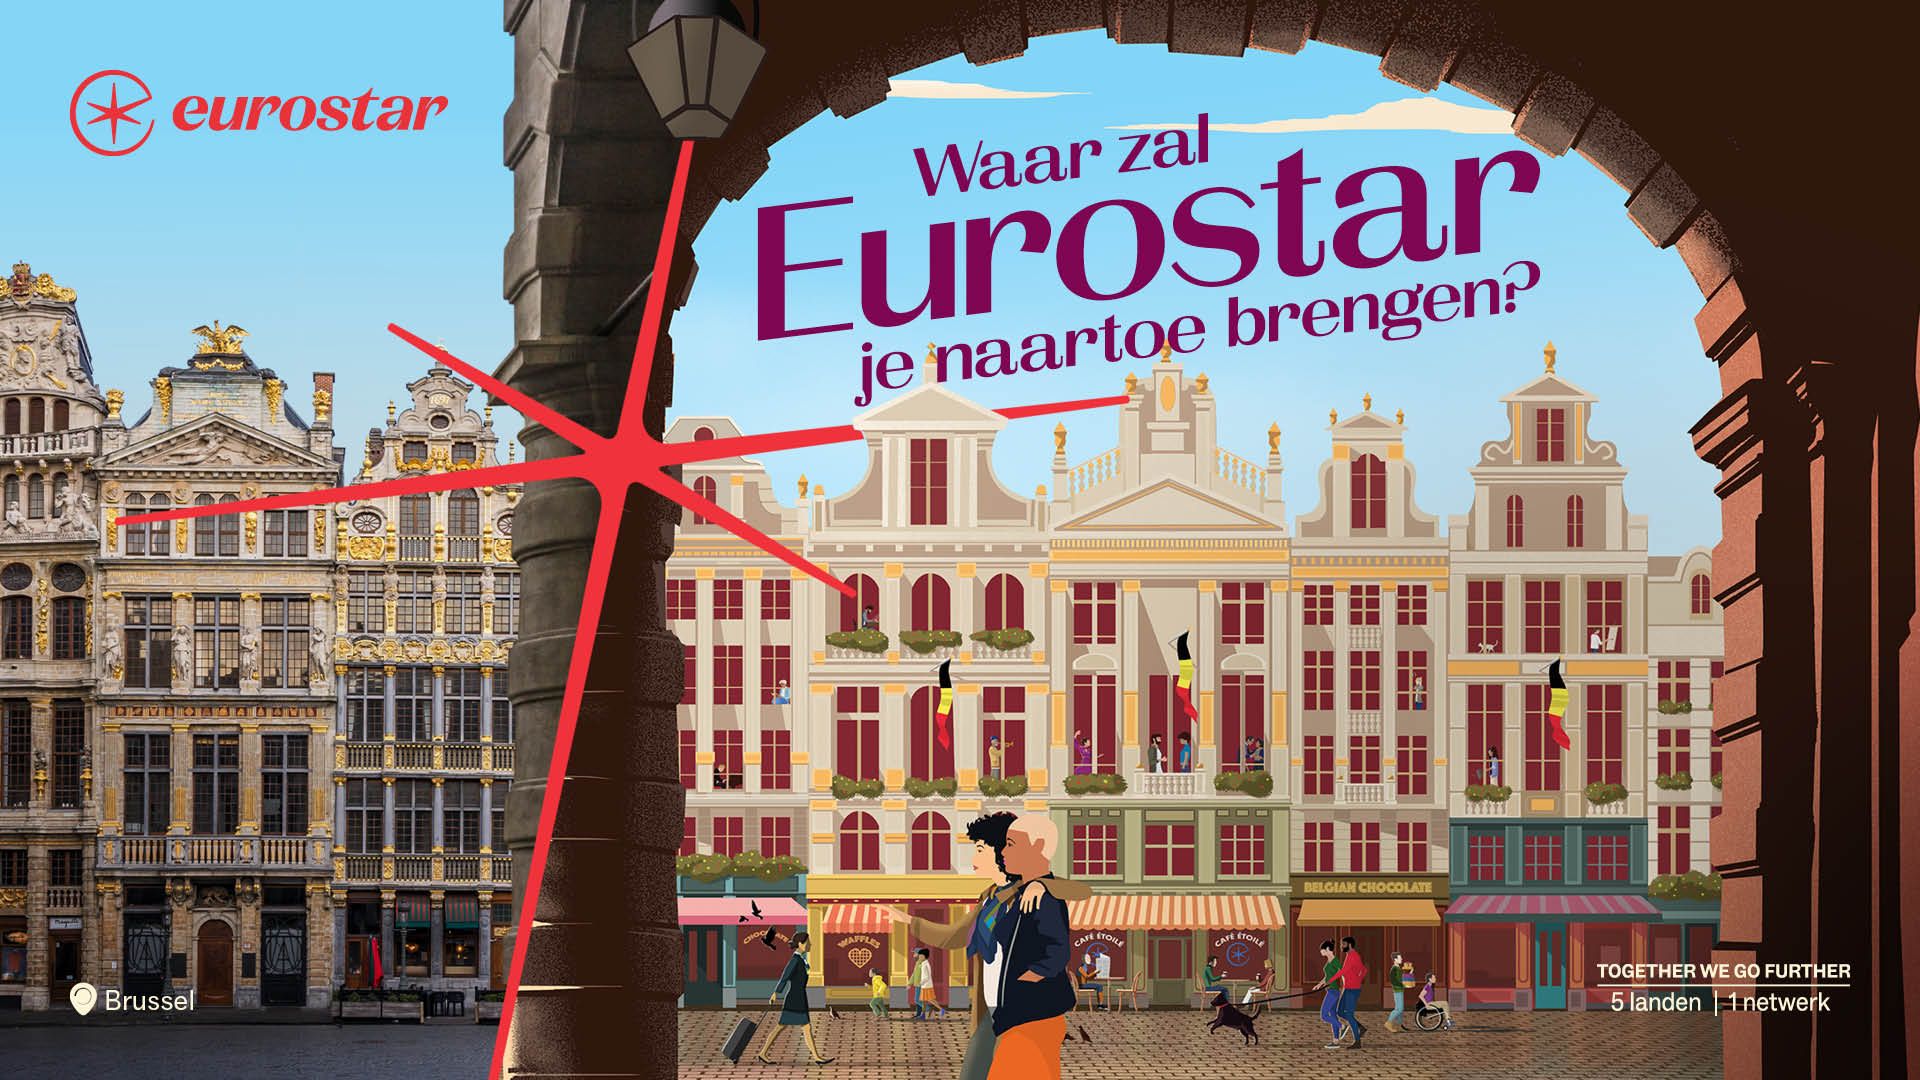 Matt Saunders was one of a number of artists to feature on a multi-city Eurostar campaign, which also combined illustration with photography